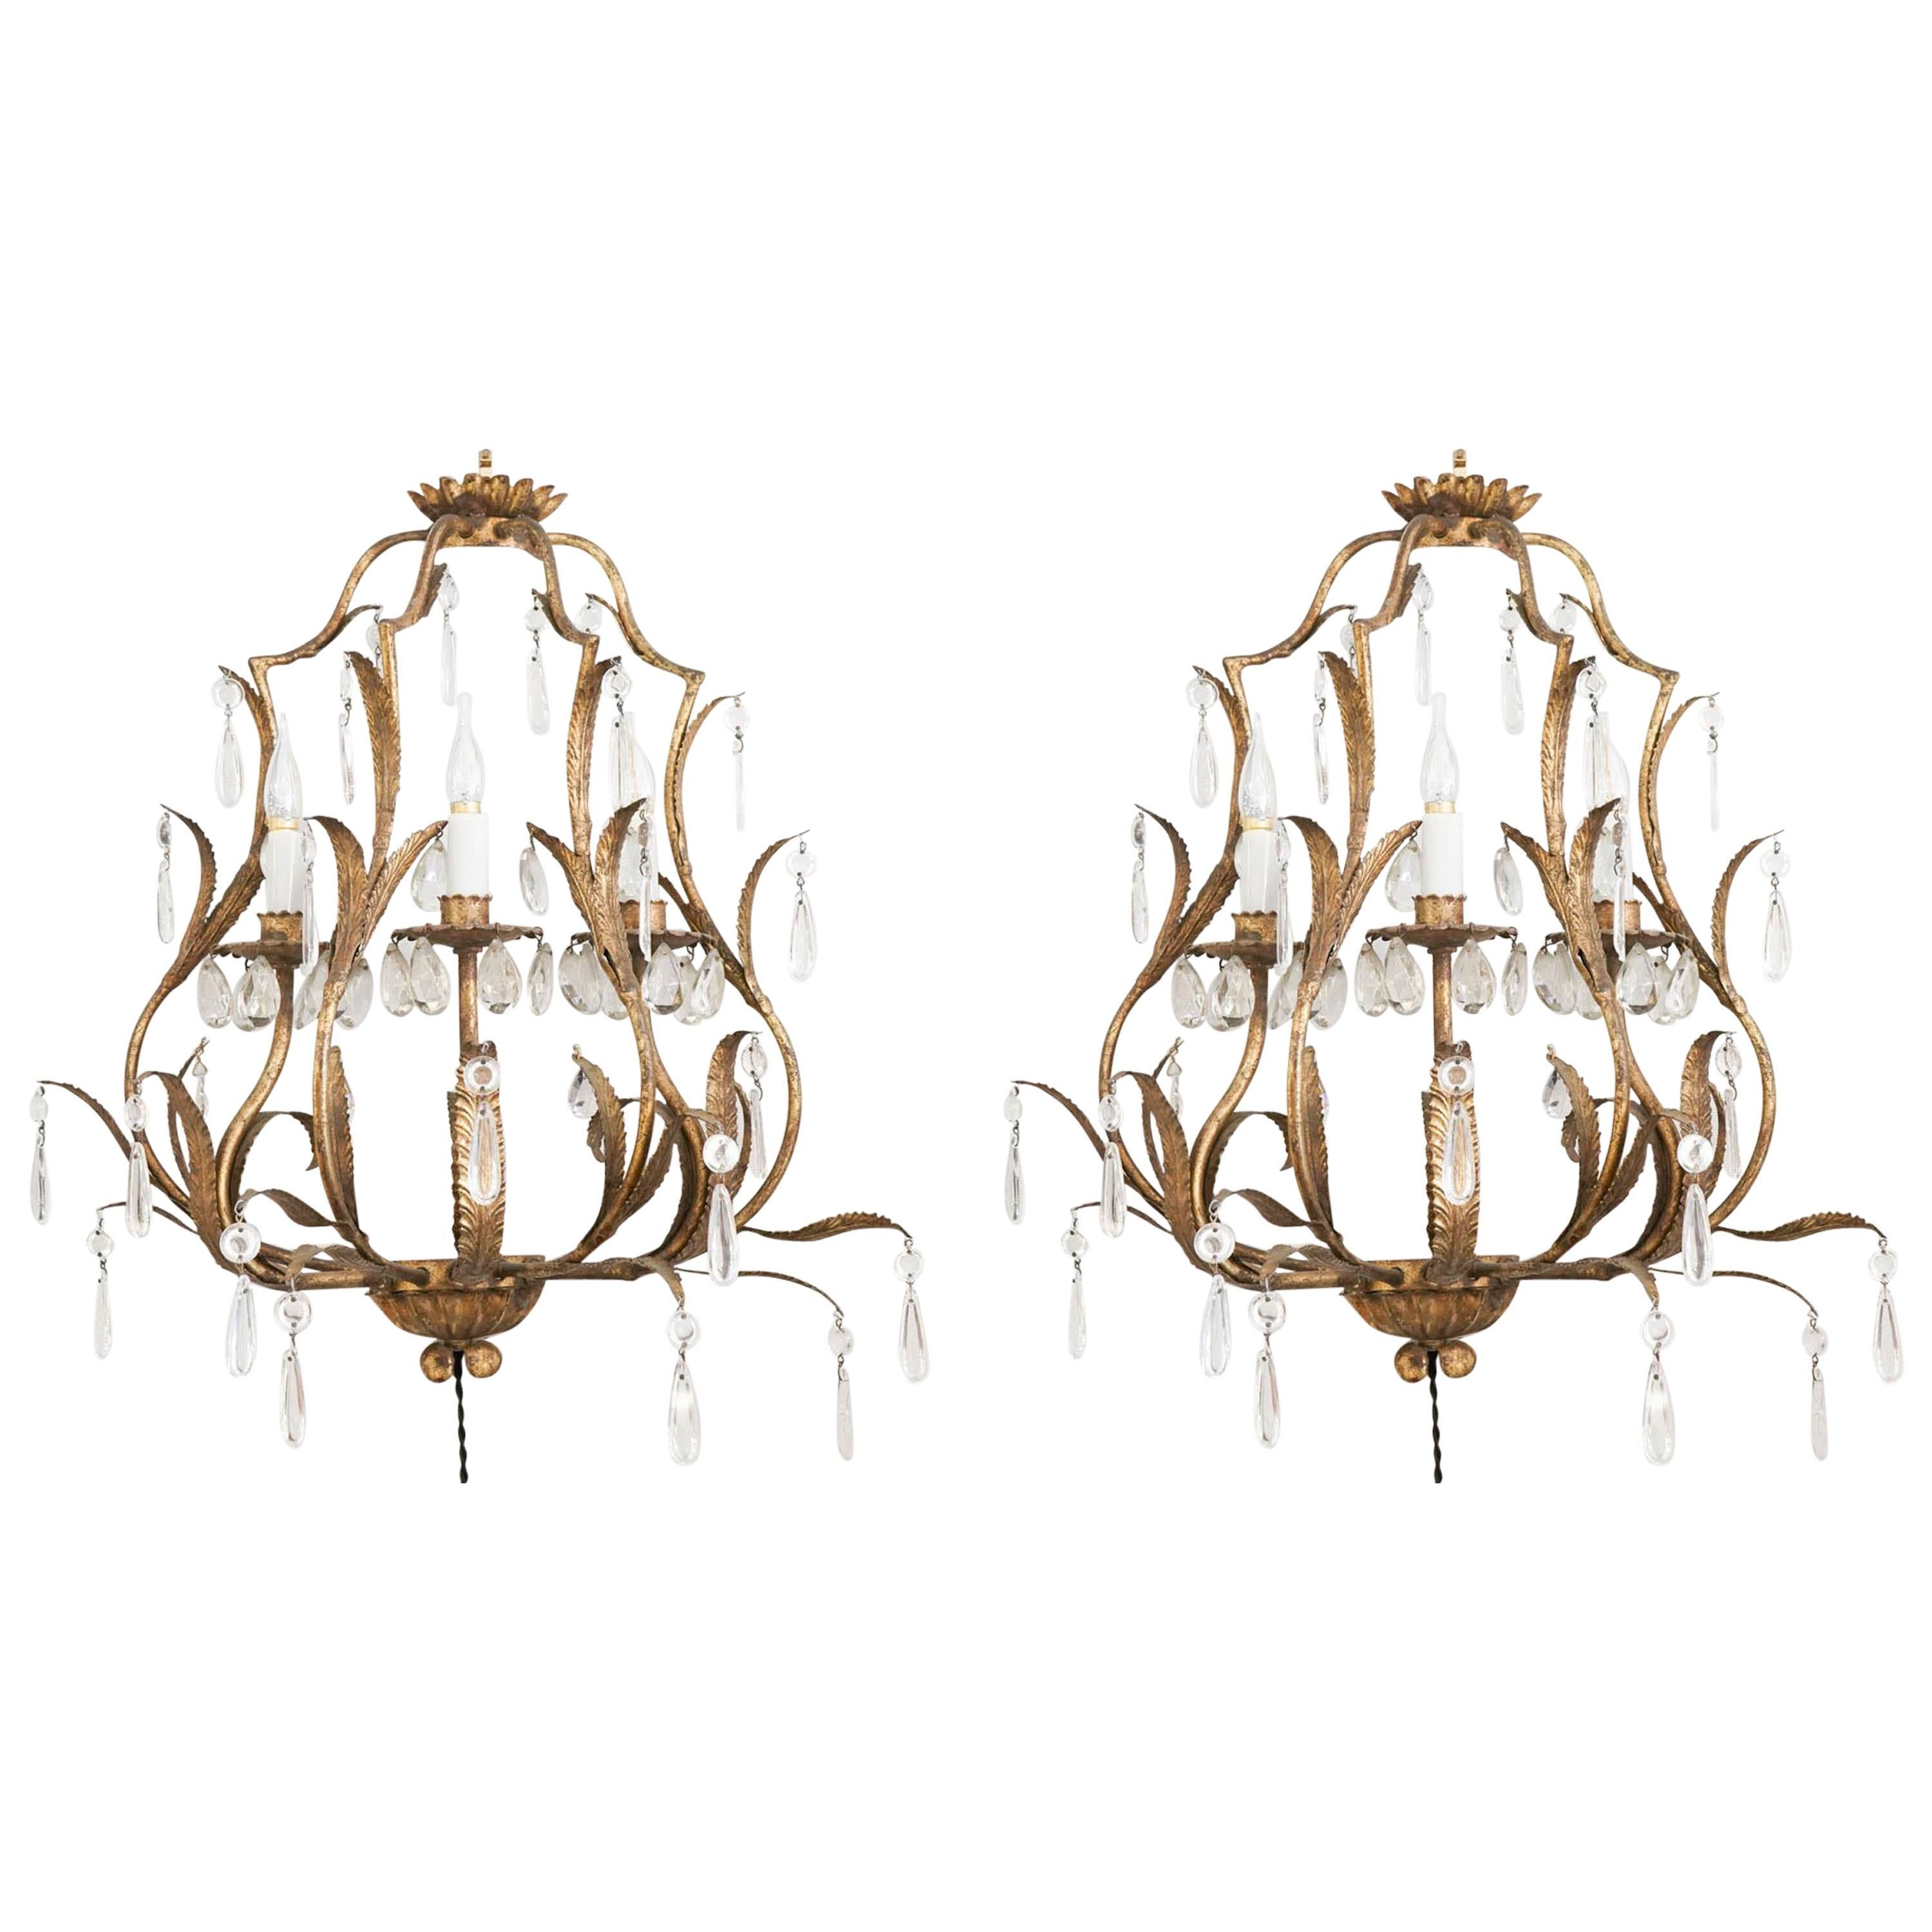 Pair of Sconces in Gold gilt metal with crystals, 1950-1960, Three lights